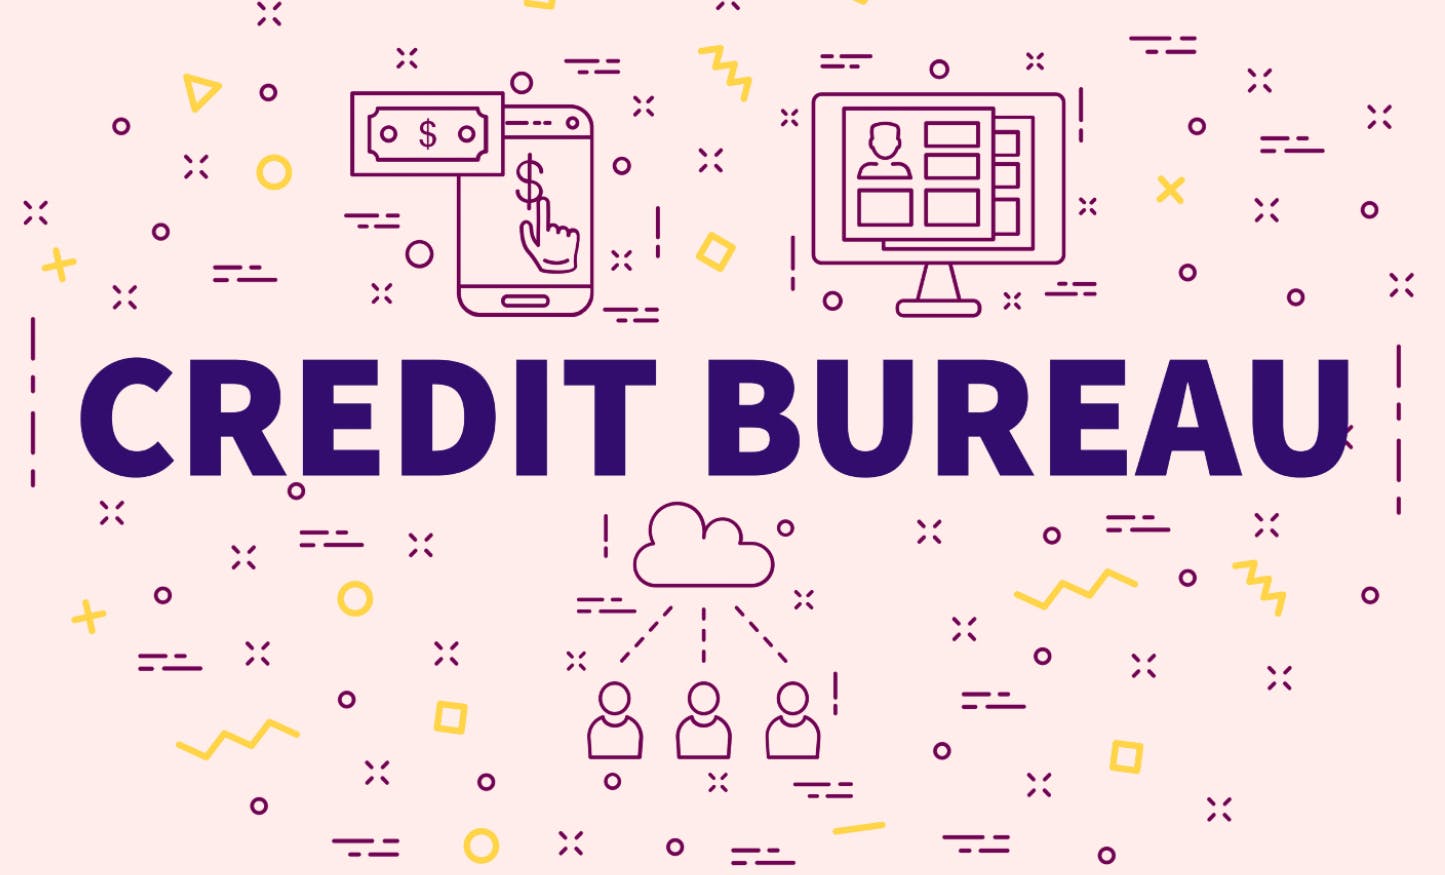 Who Are the Credit Bureaus?